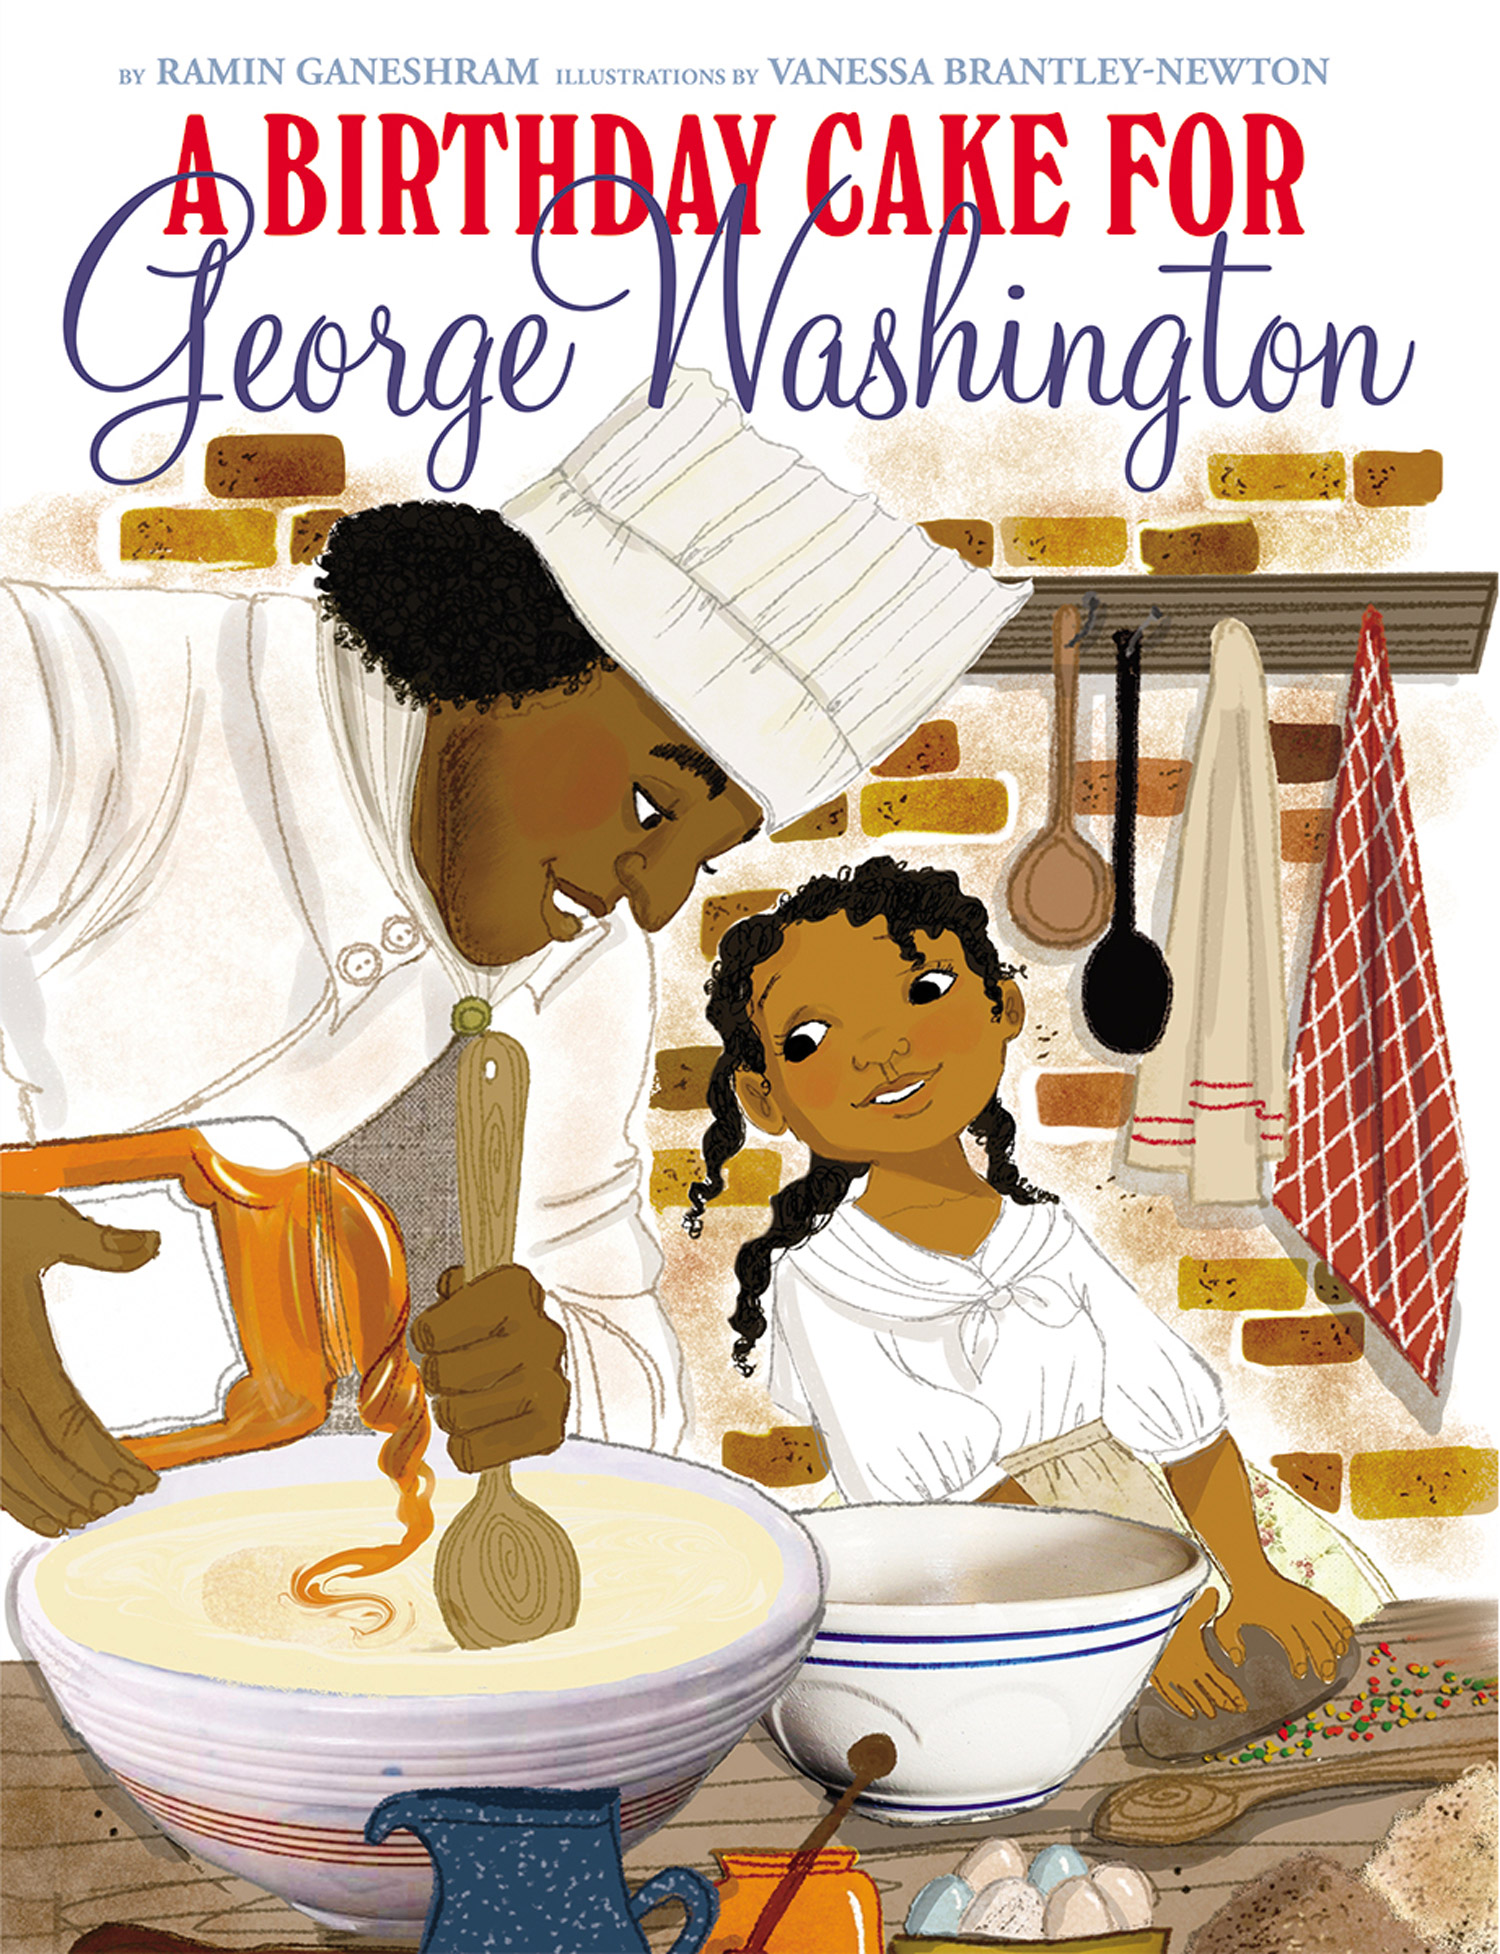 The cover of the book "A Birthday Cake for George Washington" by Ramin Ganeshram. (Scholastic/AP)